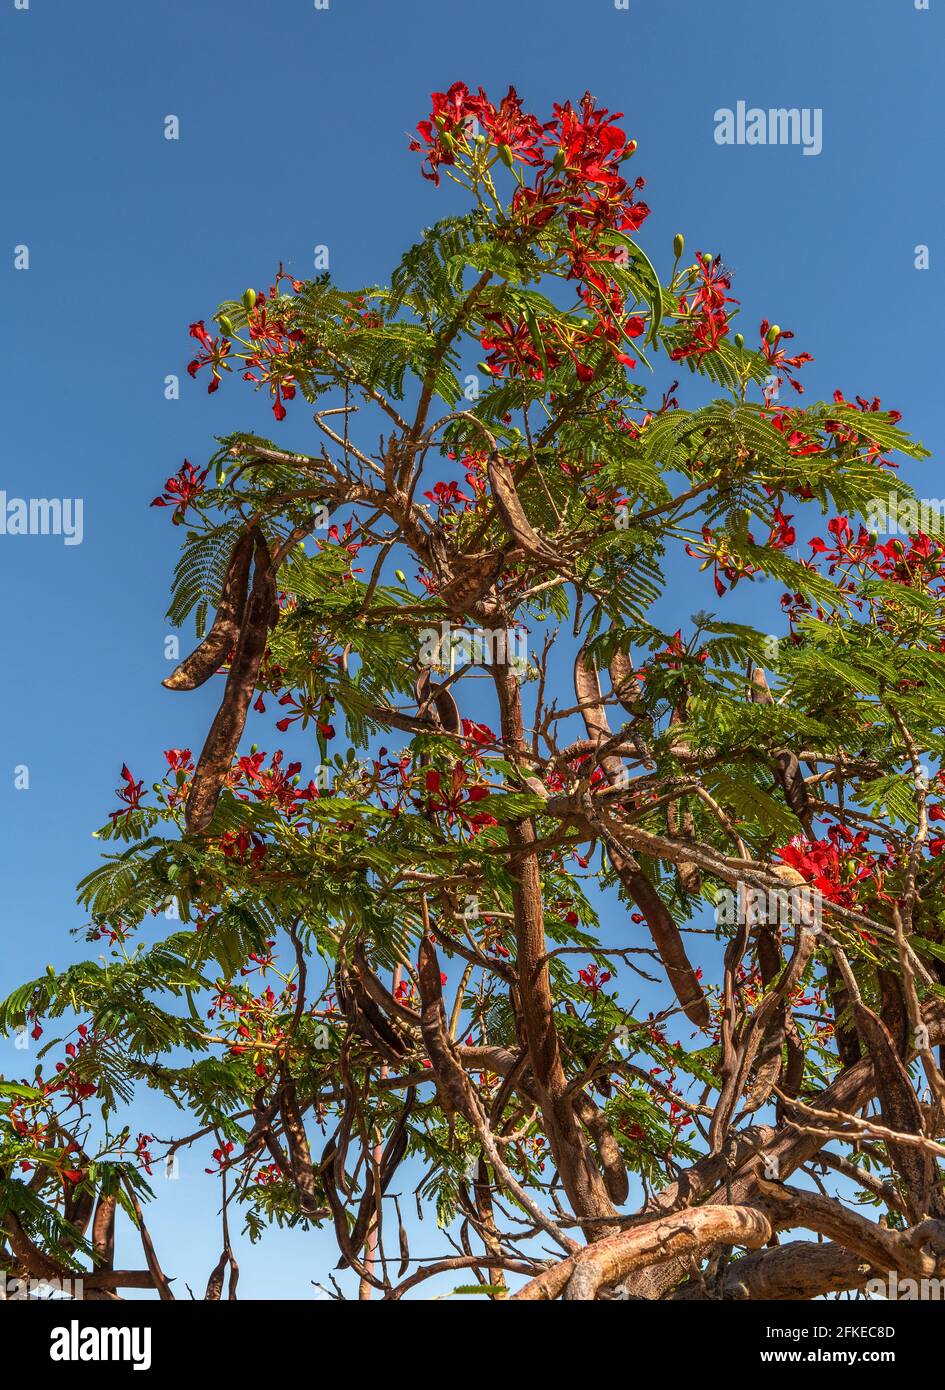 Mimosa tree with red flowers in Namibia, Africa Stock Photo